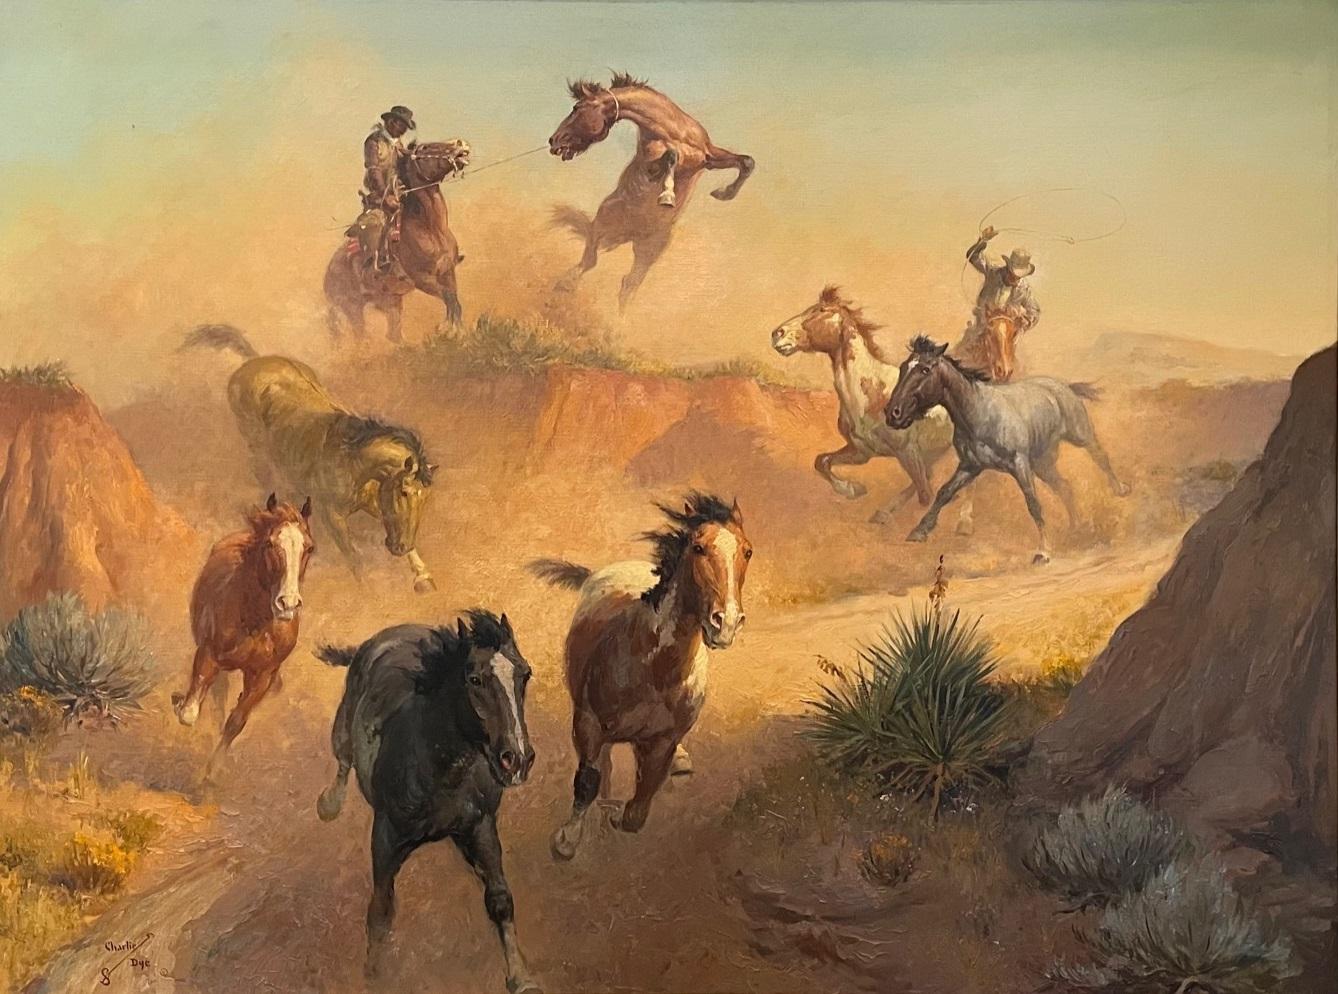 'Mustang Ballet' Oil on Linen, Signed “Charlie Dye” with branding iron symbol - Painting by  Charlie Dye